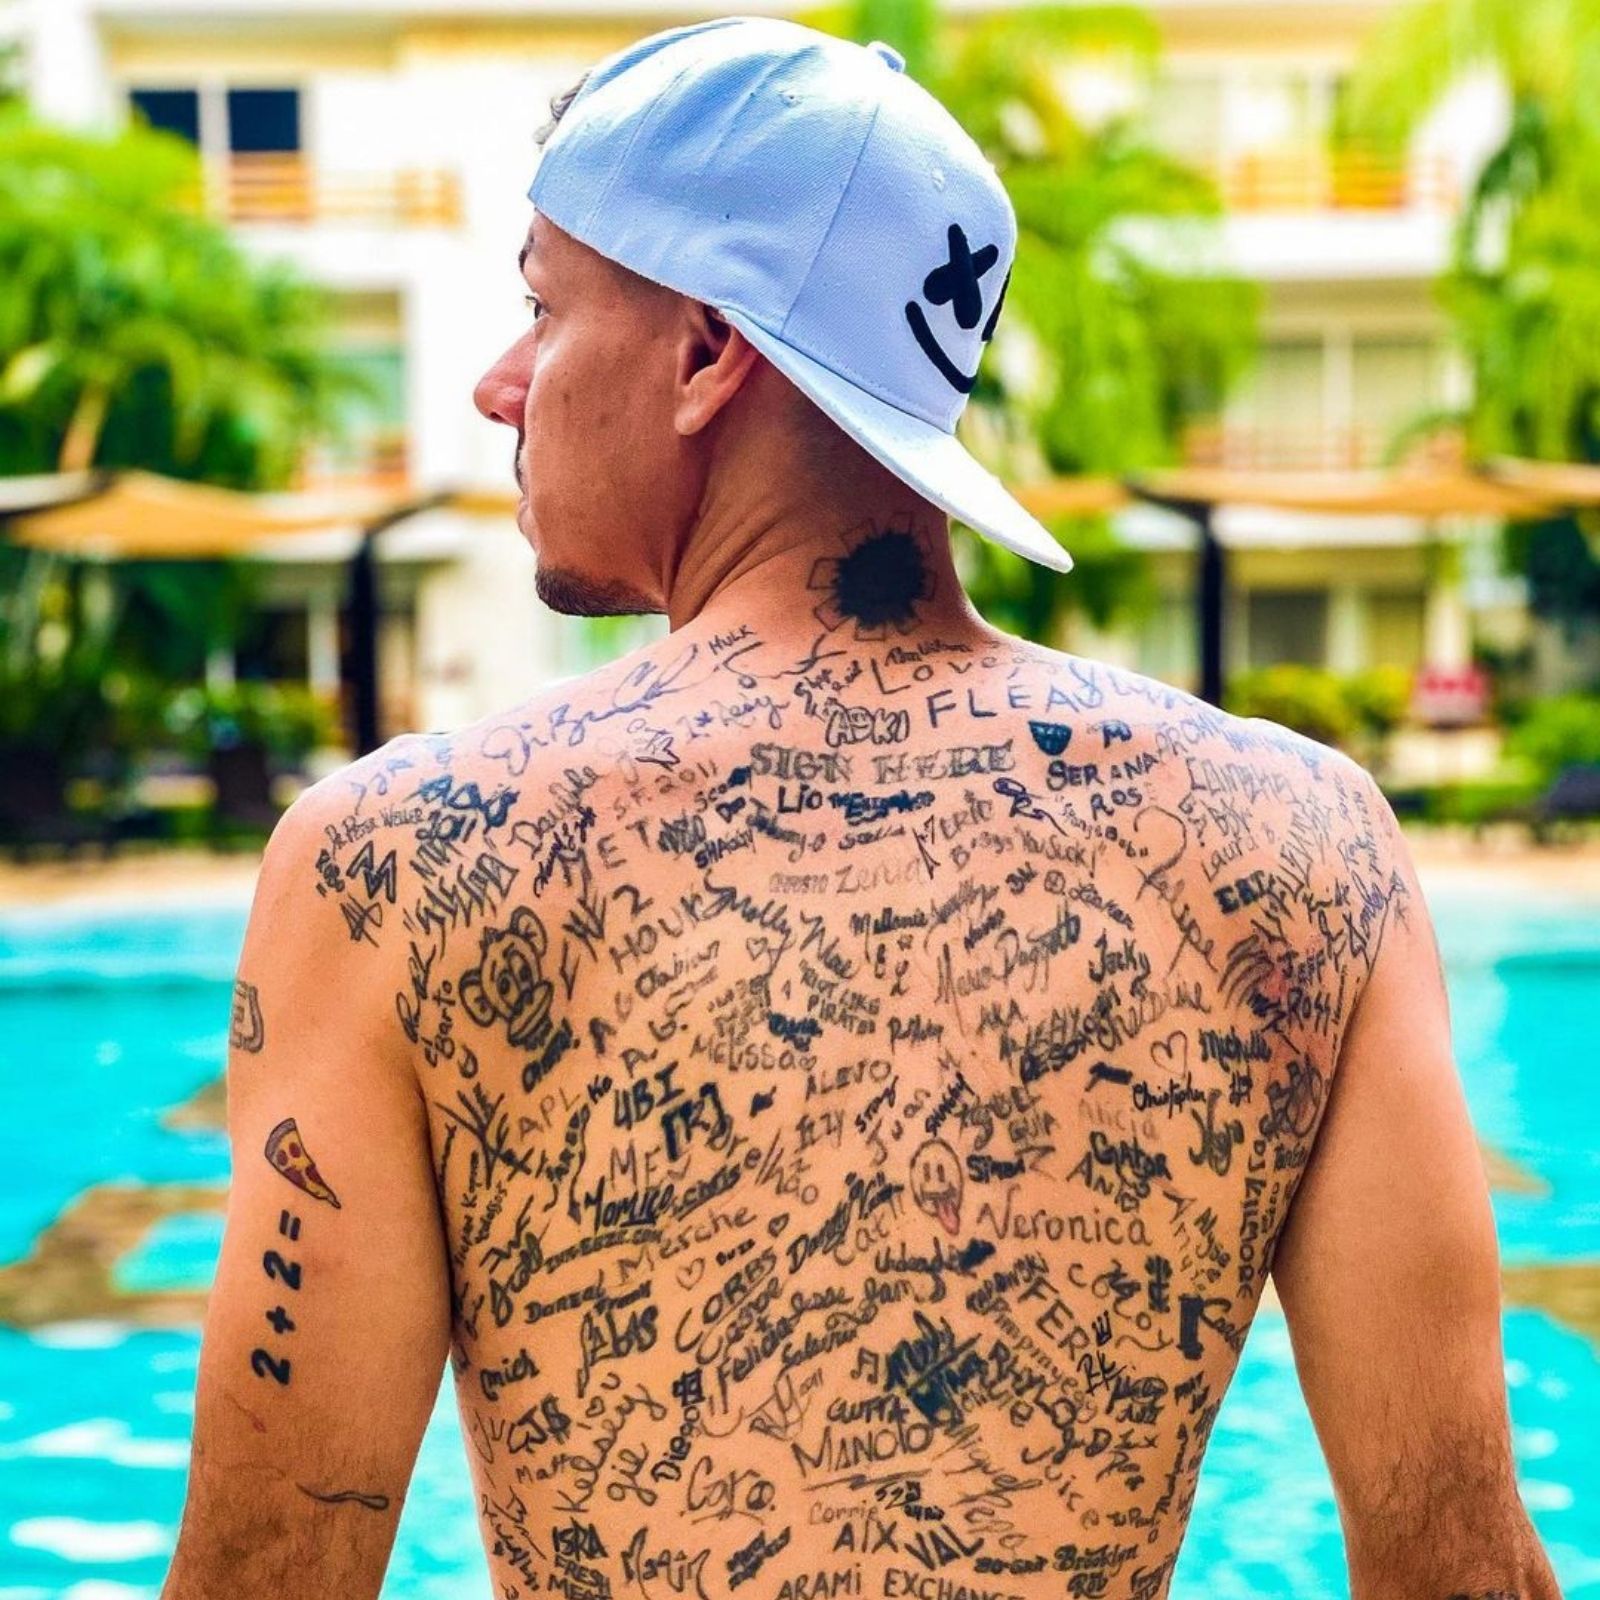 Man with over 200 tattoos of The Simpsons characters confirmed as record  holder  Guinness World Records